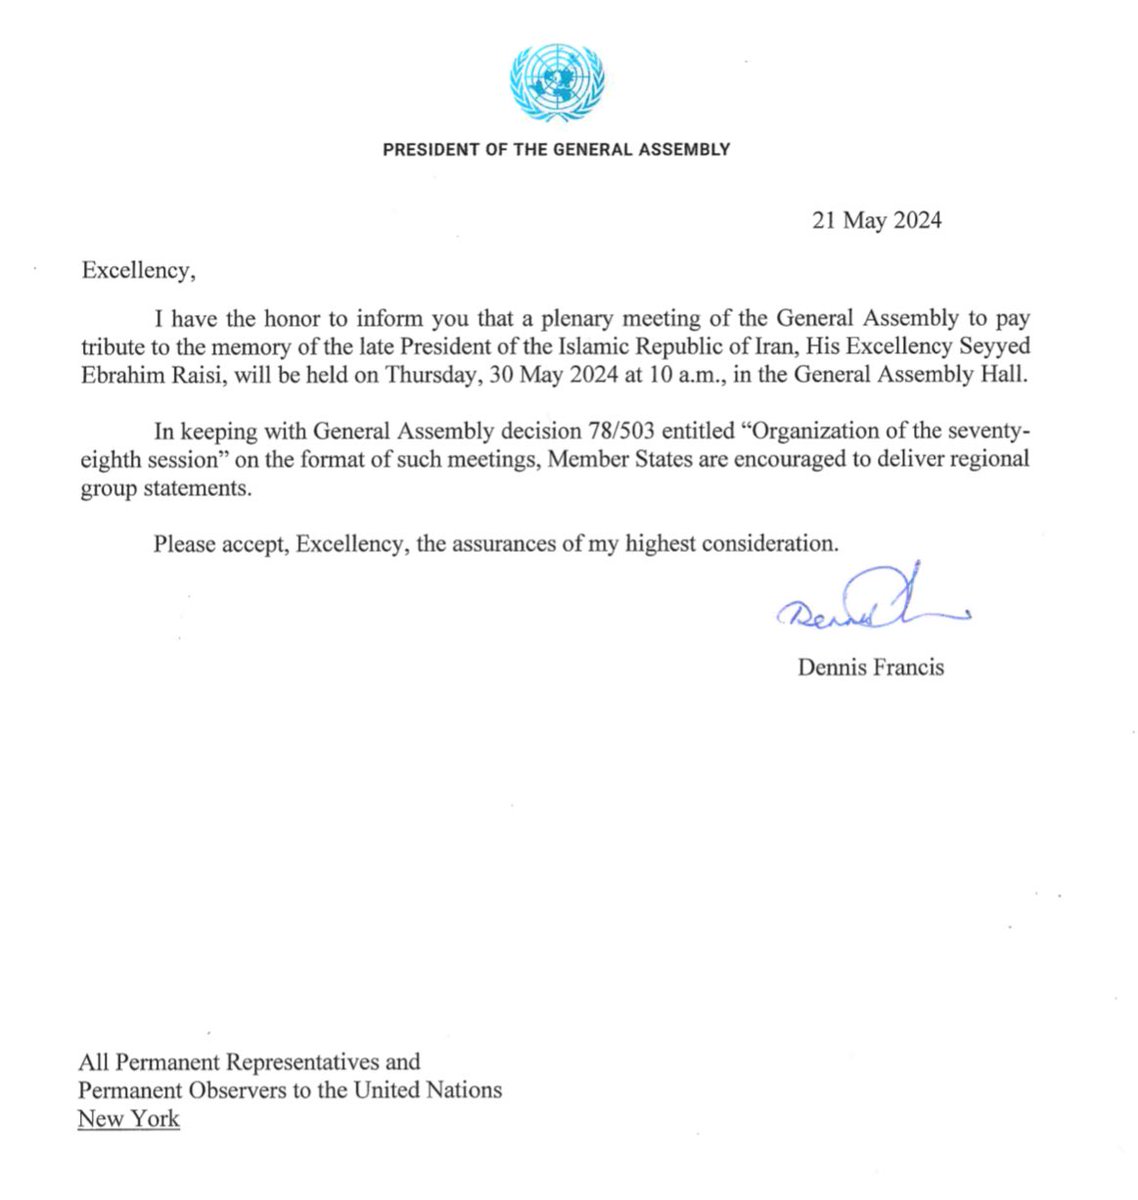 You literally cannot make this stuff up. 

The UN General Assembly will be holding a meeting to pay tribute to the Butcher of Tehran aka Ebrahim Raisi. 

The UN used to be an organization that prevented atrocities around the globe, but now they give homage to murderous dictators.